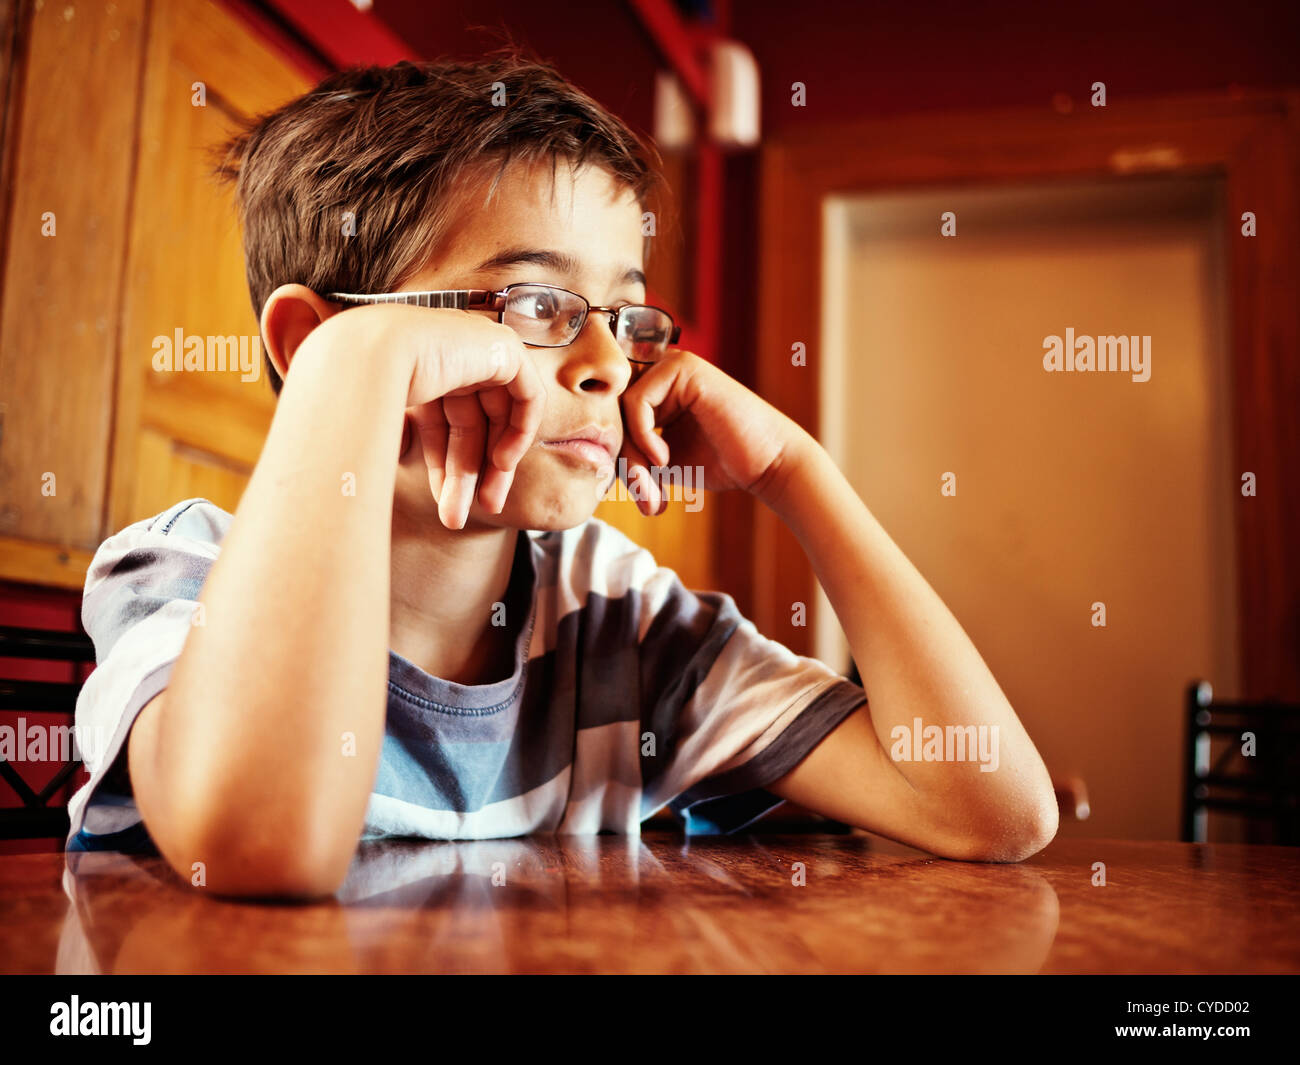 Contemplation: boy sits at table. Stock Photo